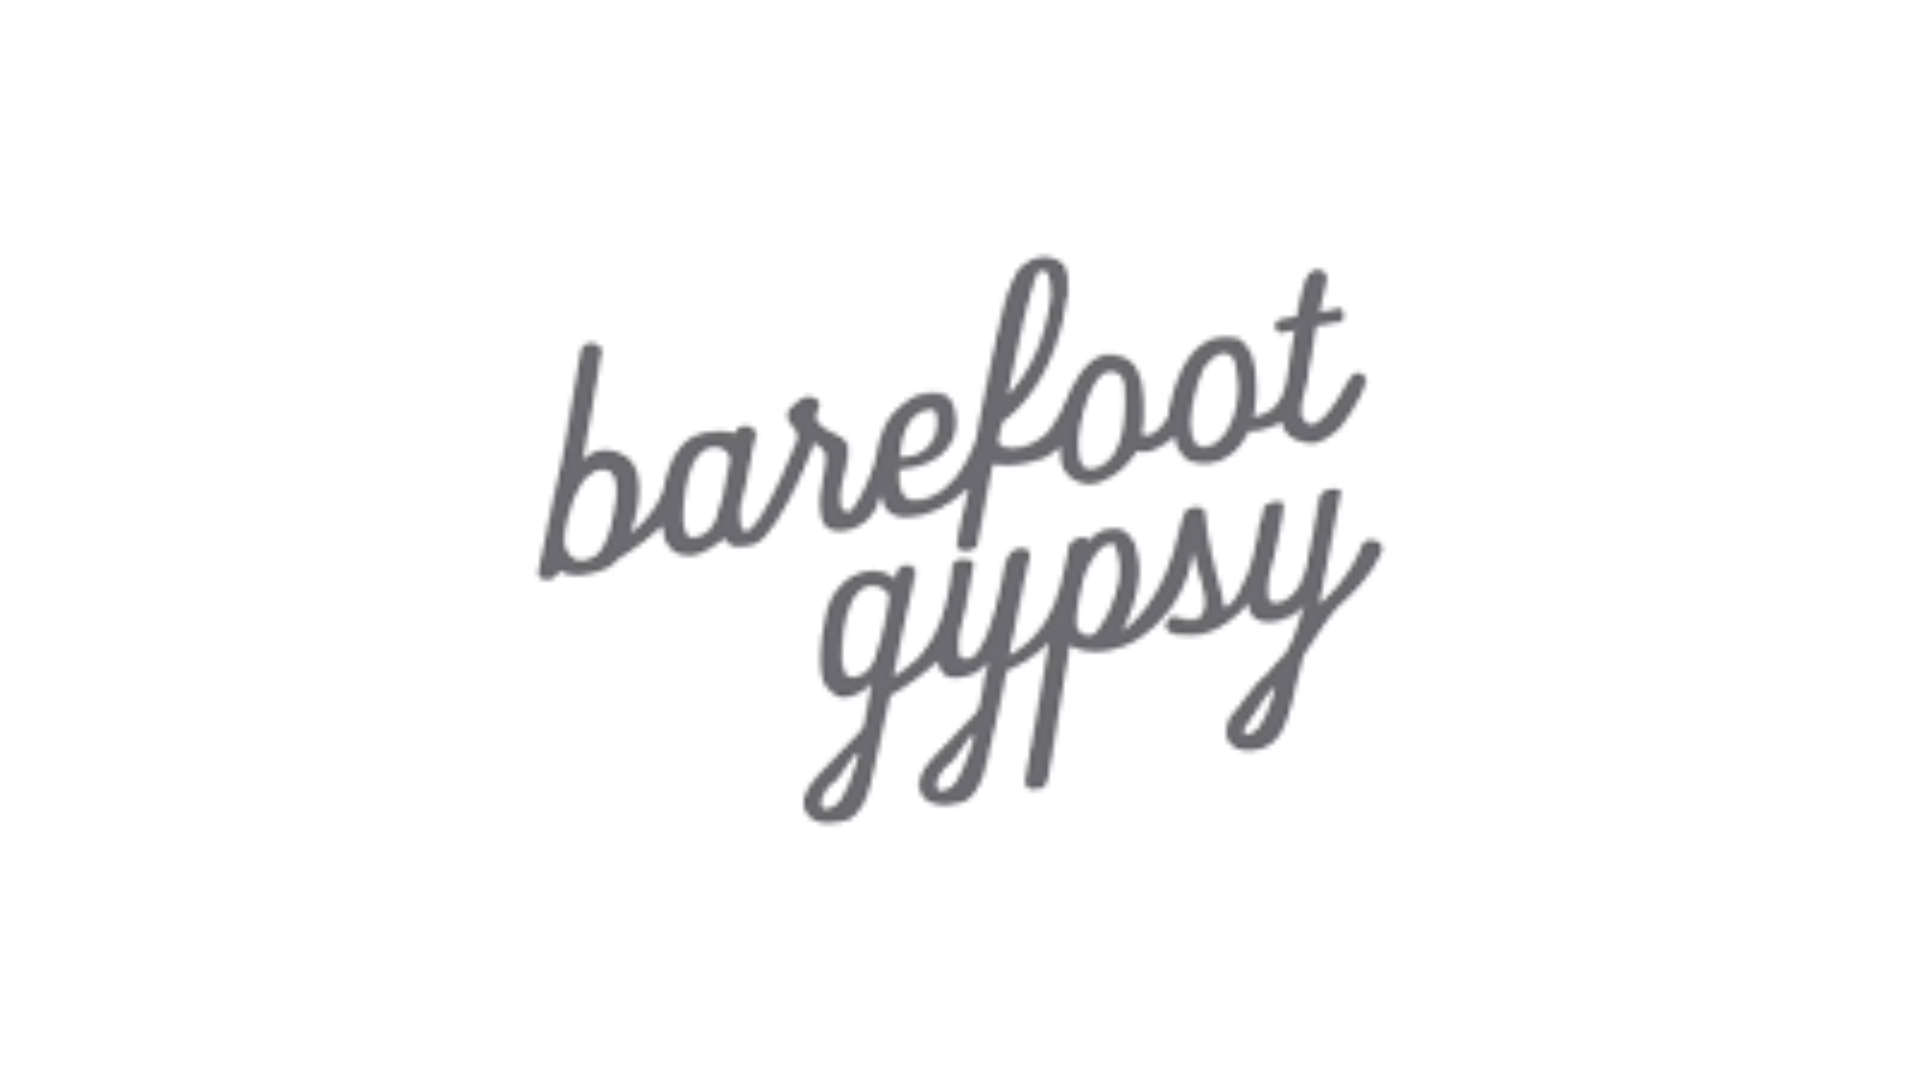 Get the Coastal style by shopping with Barefoot Gypsy